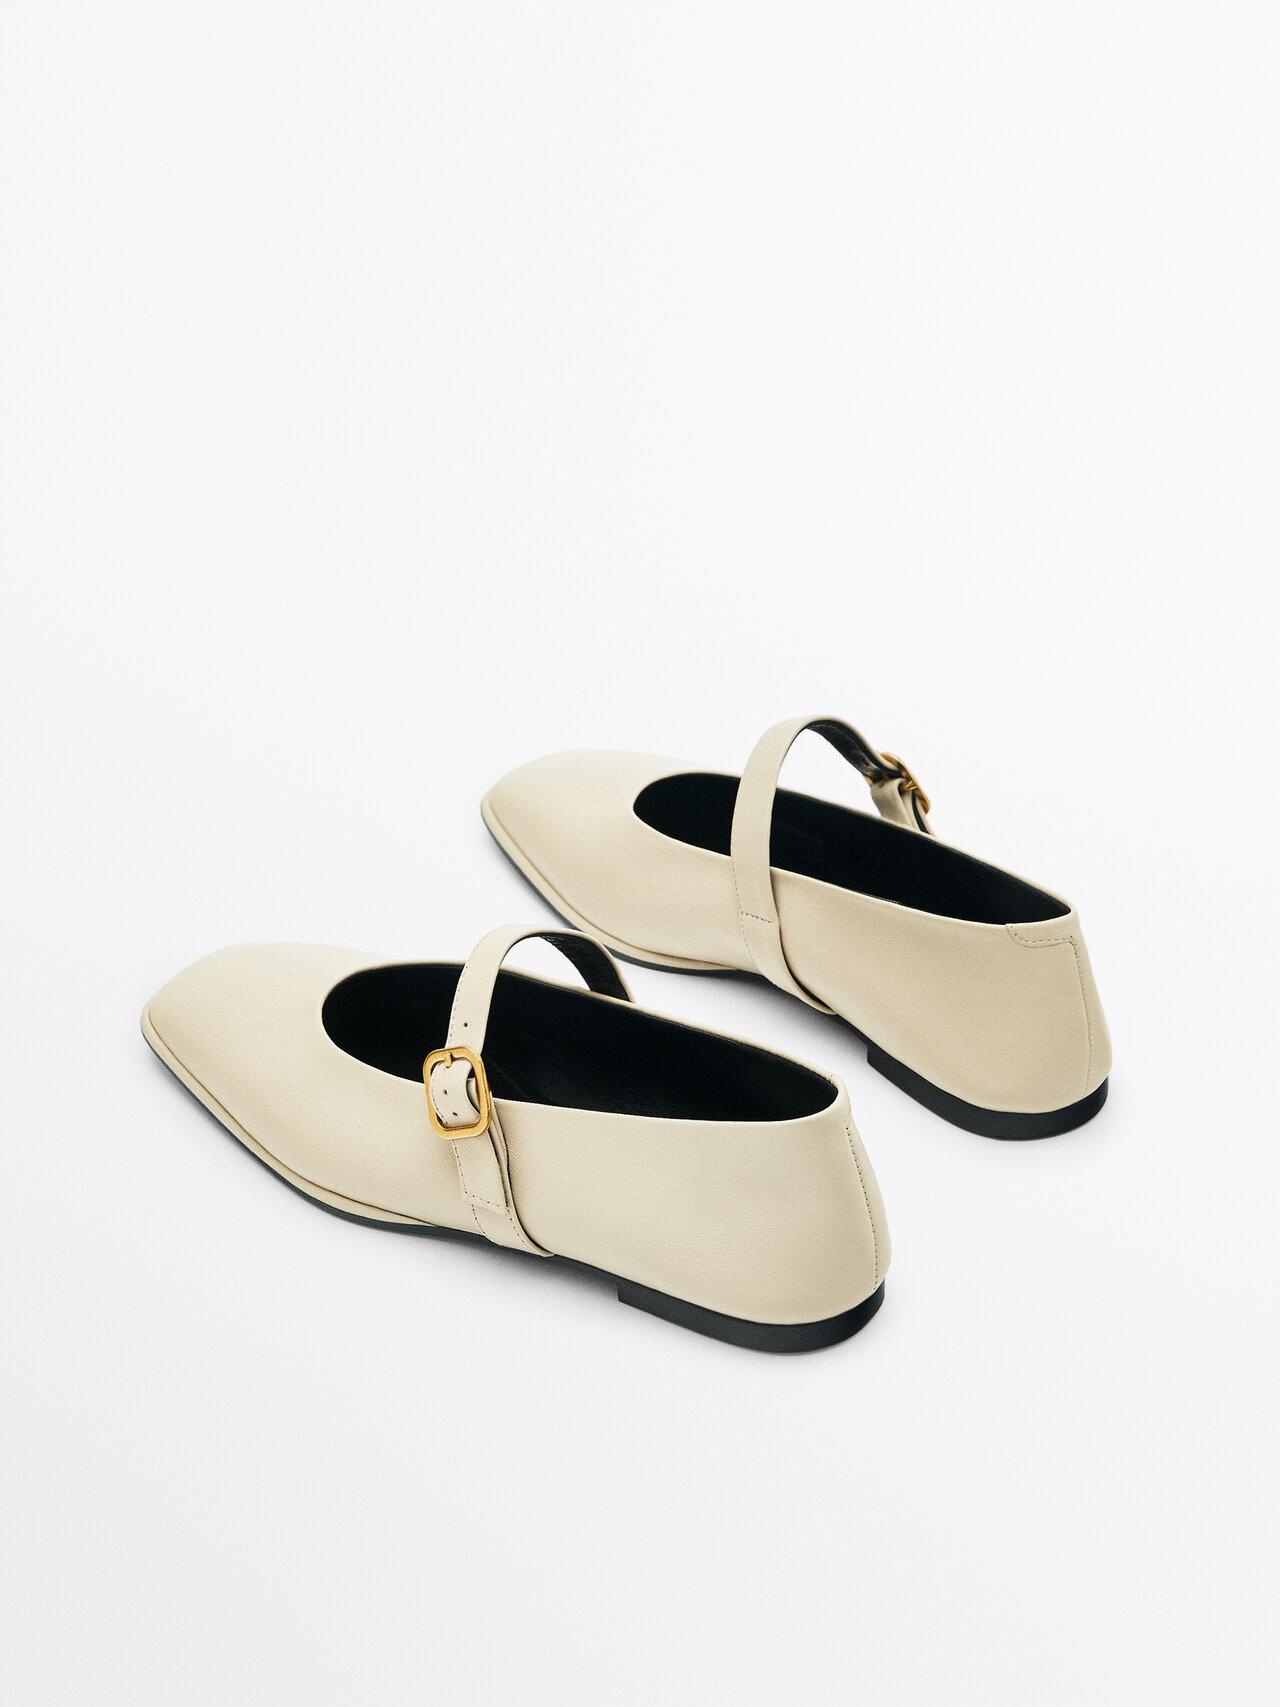 MASSIMO DUTTI Square Ballet Flats With Buckled Strap in Natural | Lyst